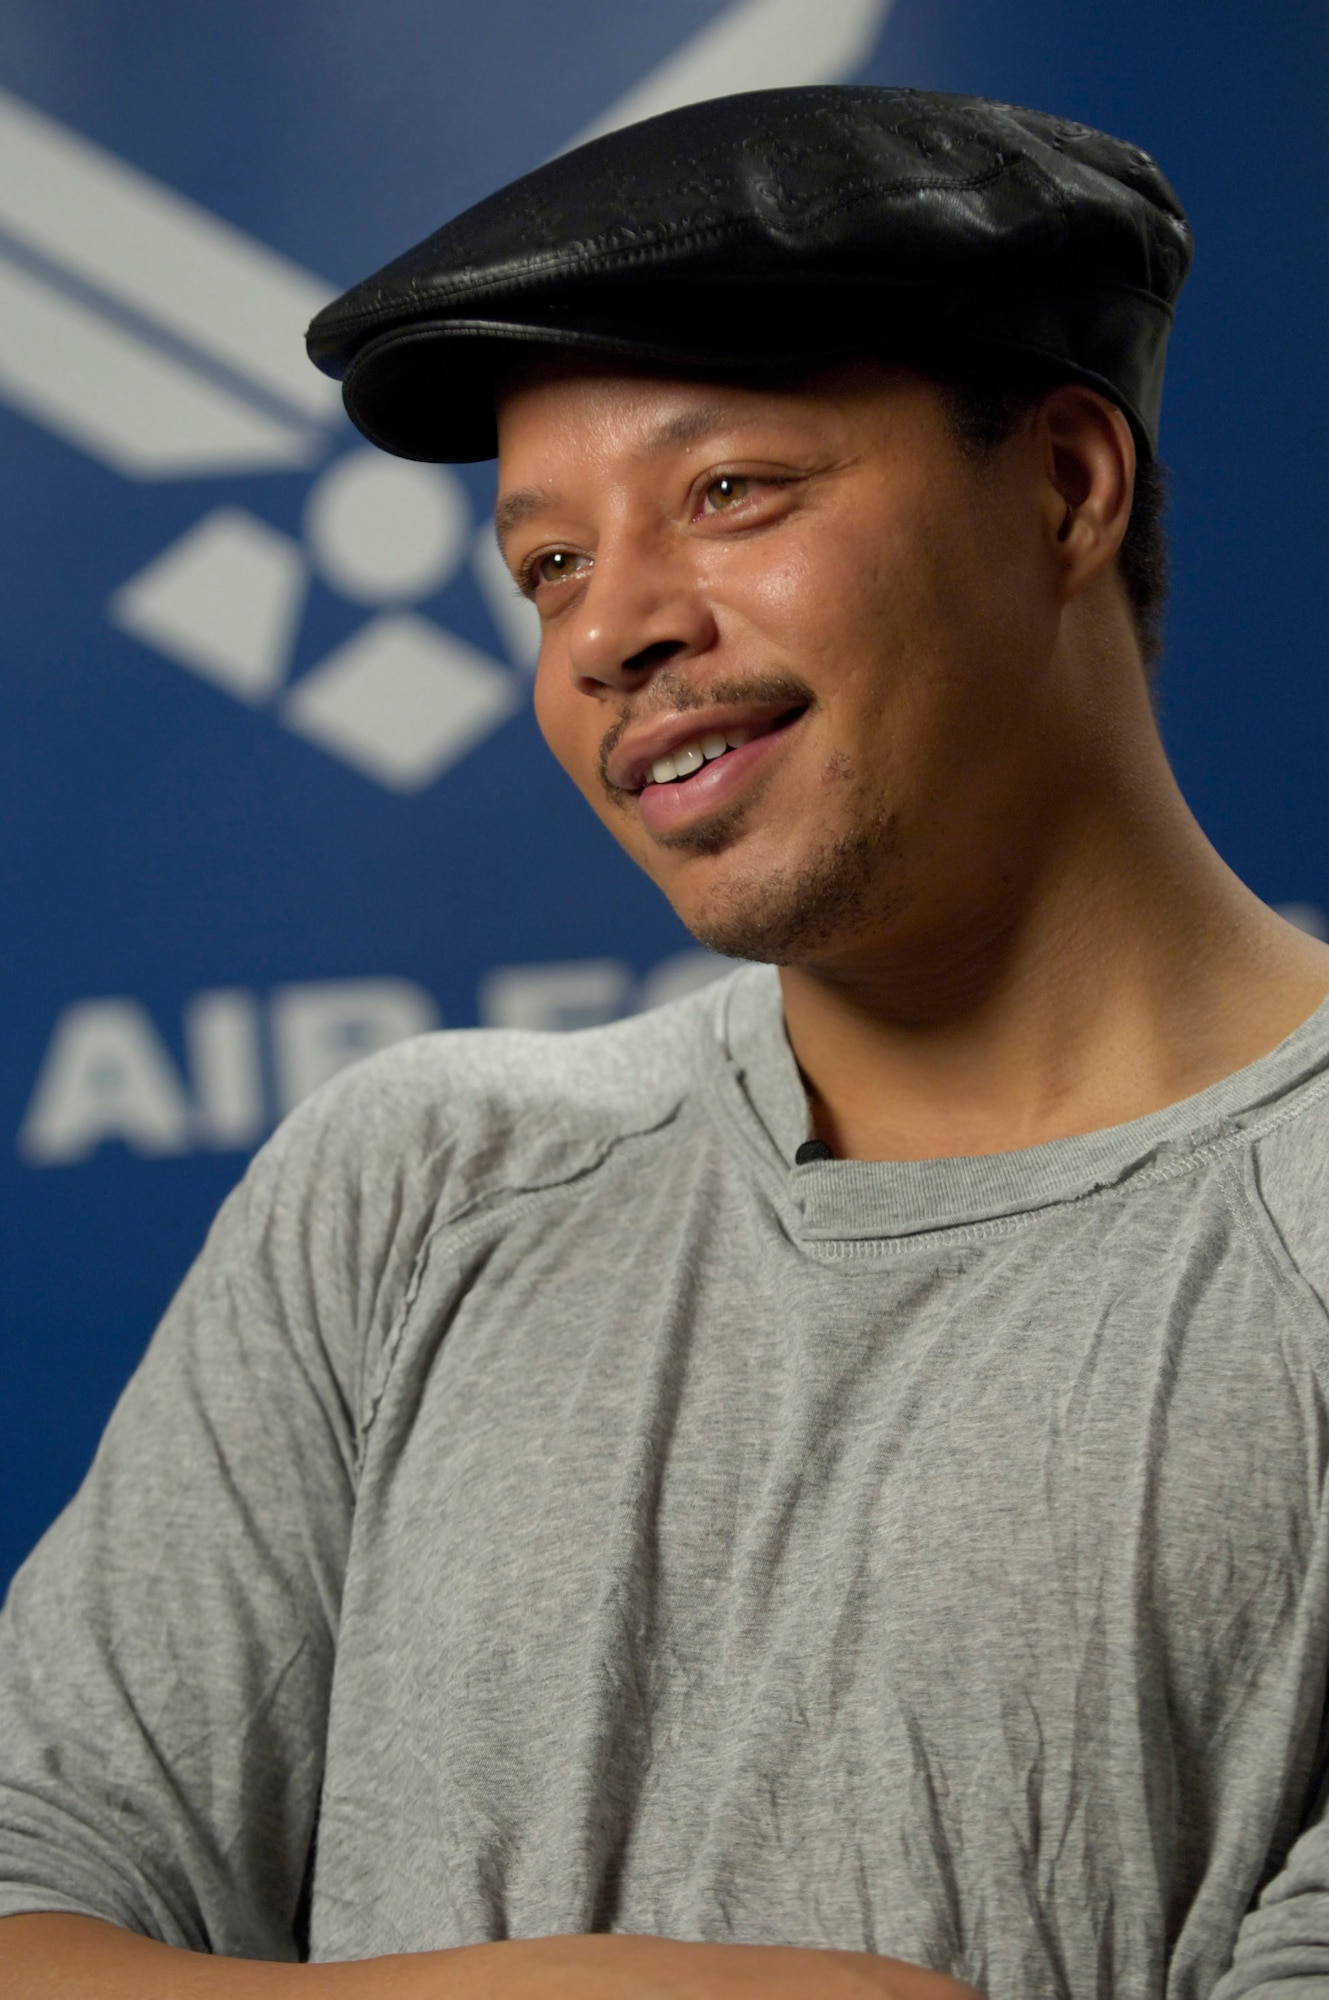 Oscar-nominated actor Terrence Howard describes his experiences and impressions of the Air Force during an interview May 27 in New York. Mr. Howard visited two Air Force bases and trained with Airmen while preparing for his role as Lt. Col. James Rhodes in the movie Iron Man. (U.S. Air Force photo/Master Sgt. Jack Braden)